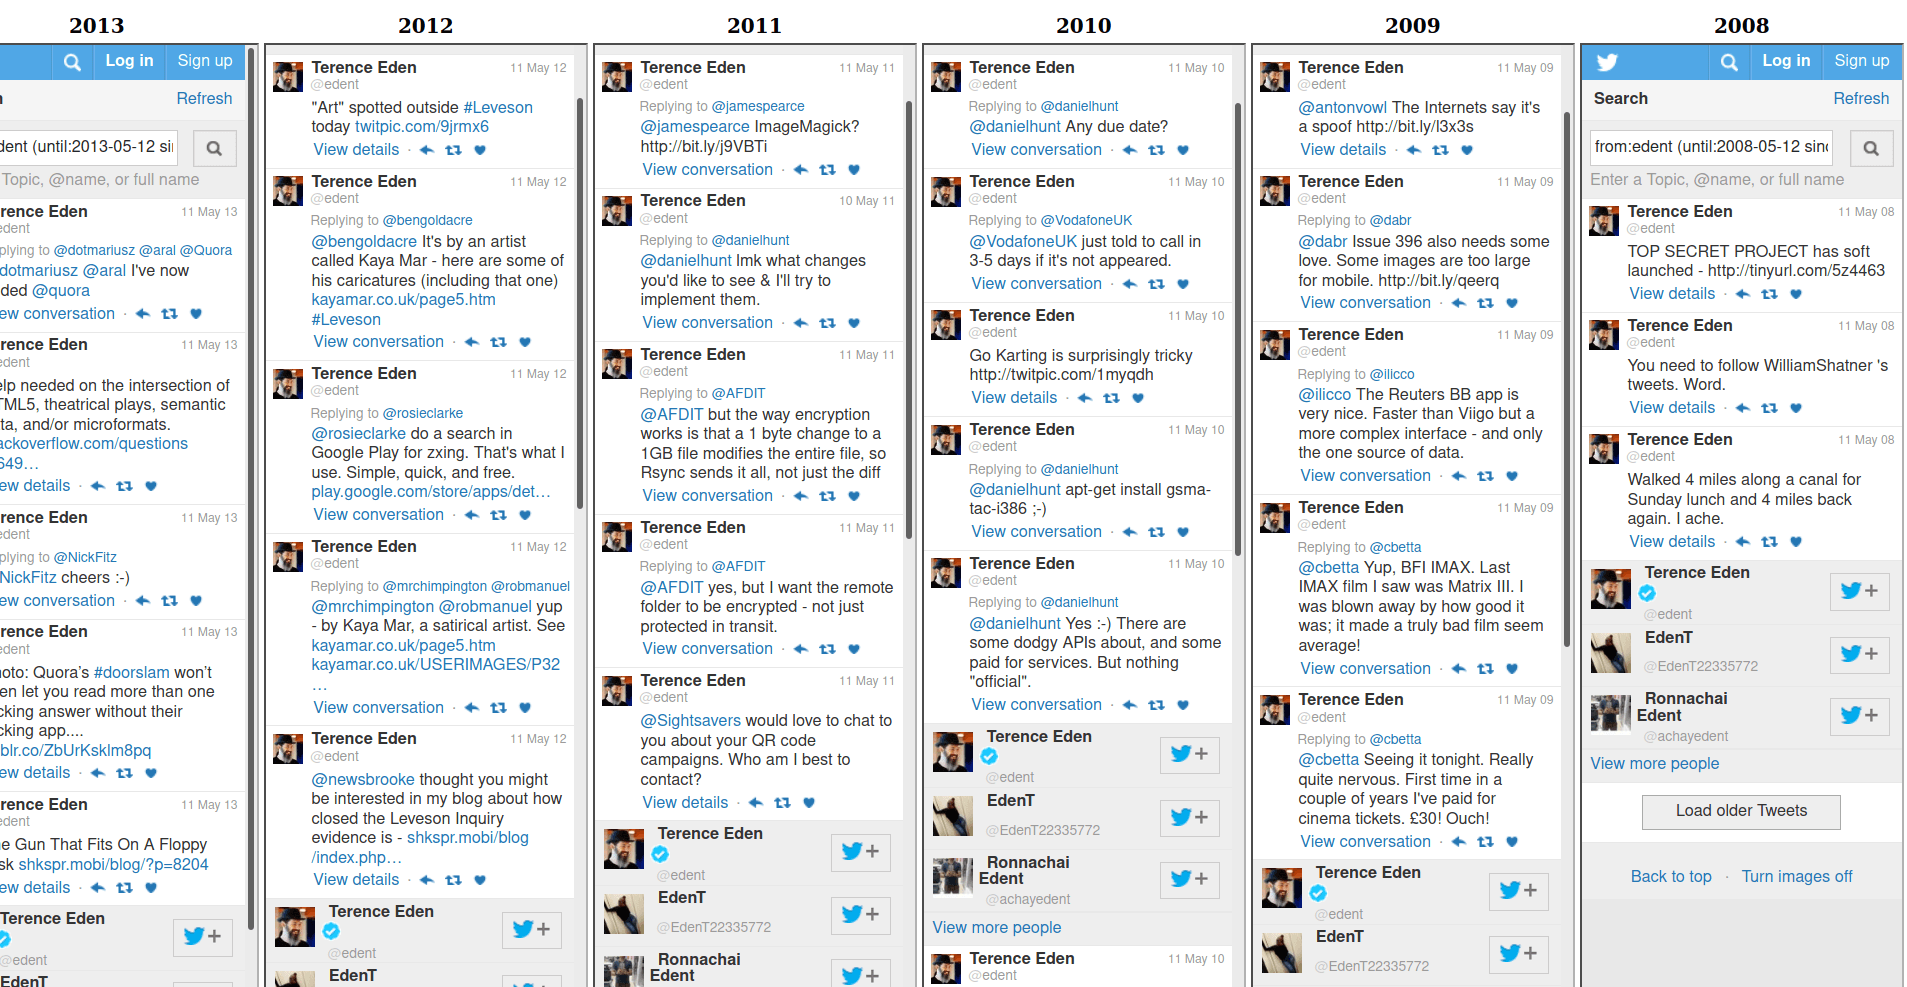 Several columns of Tweets. Each one from a previous year.